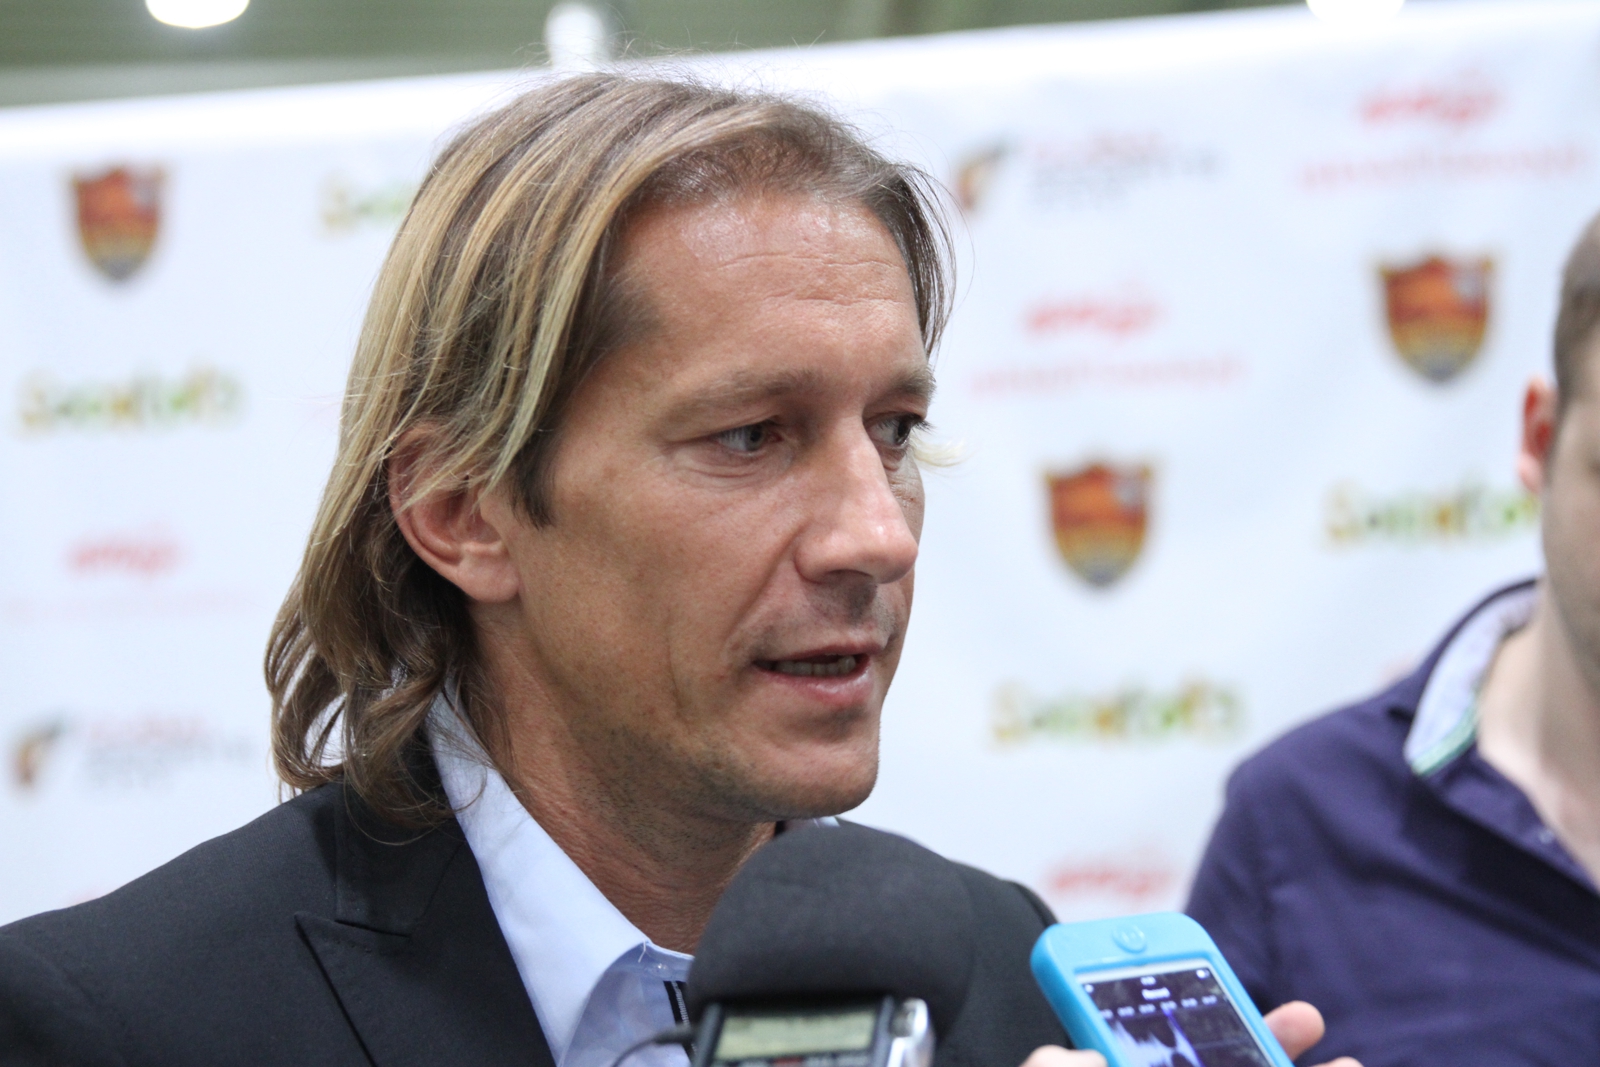 Michel_Salgado__the_former_Real_Madrid_and_Spain_legend_and_now_Dubai_Sports_City_Football_Academy_Director_of_Football_speaks_to_media_at_the_Indoor_Dome